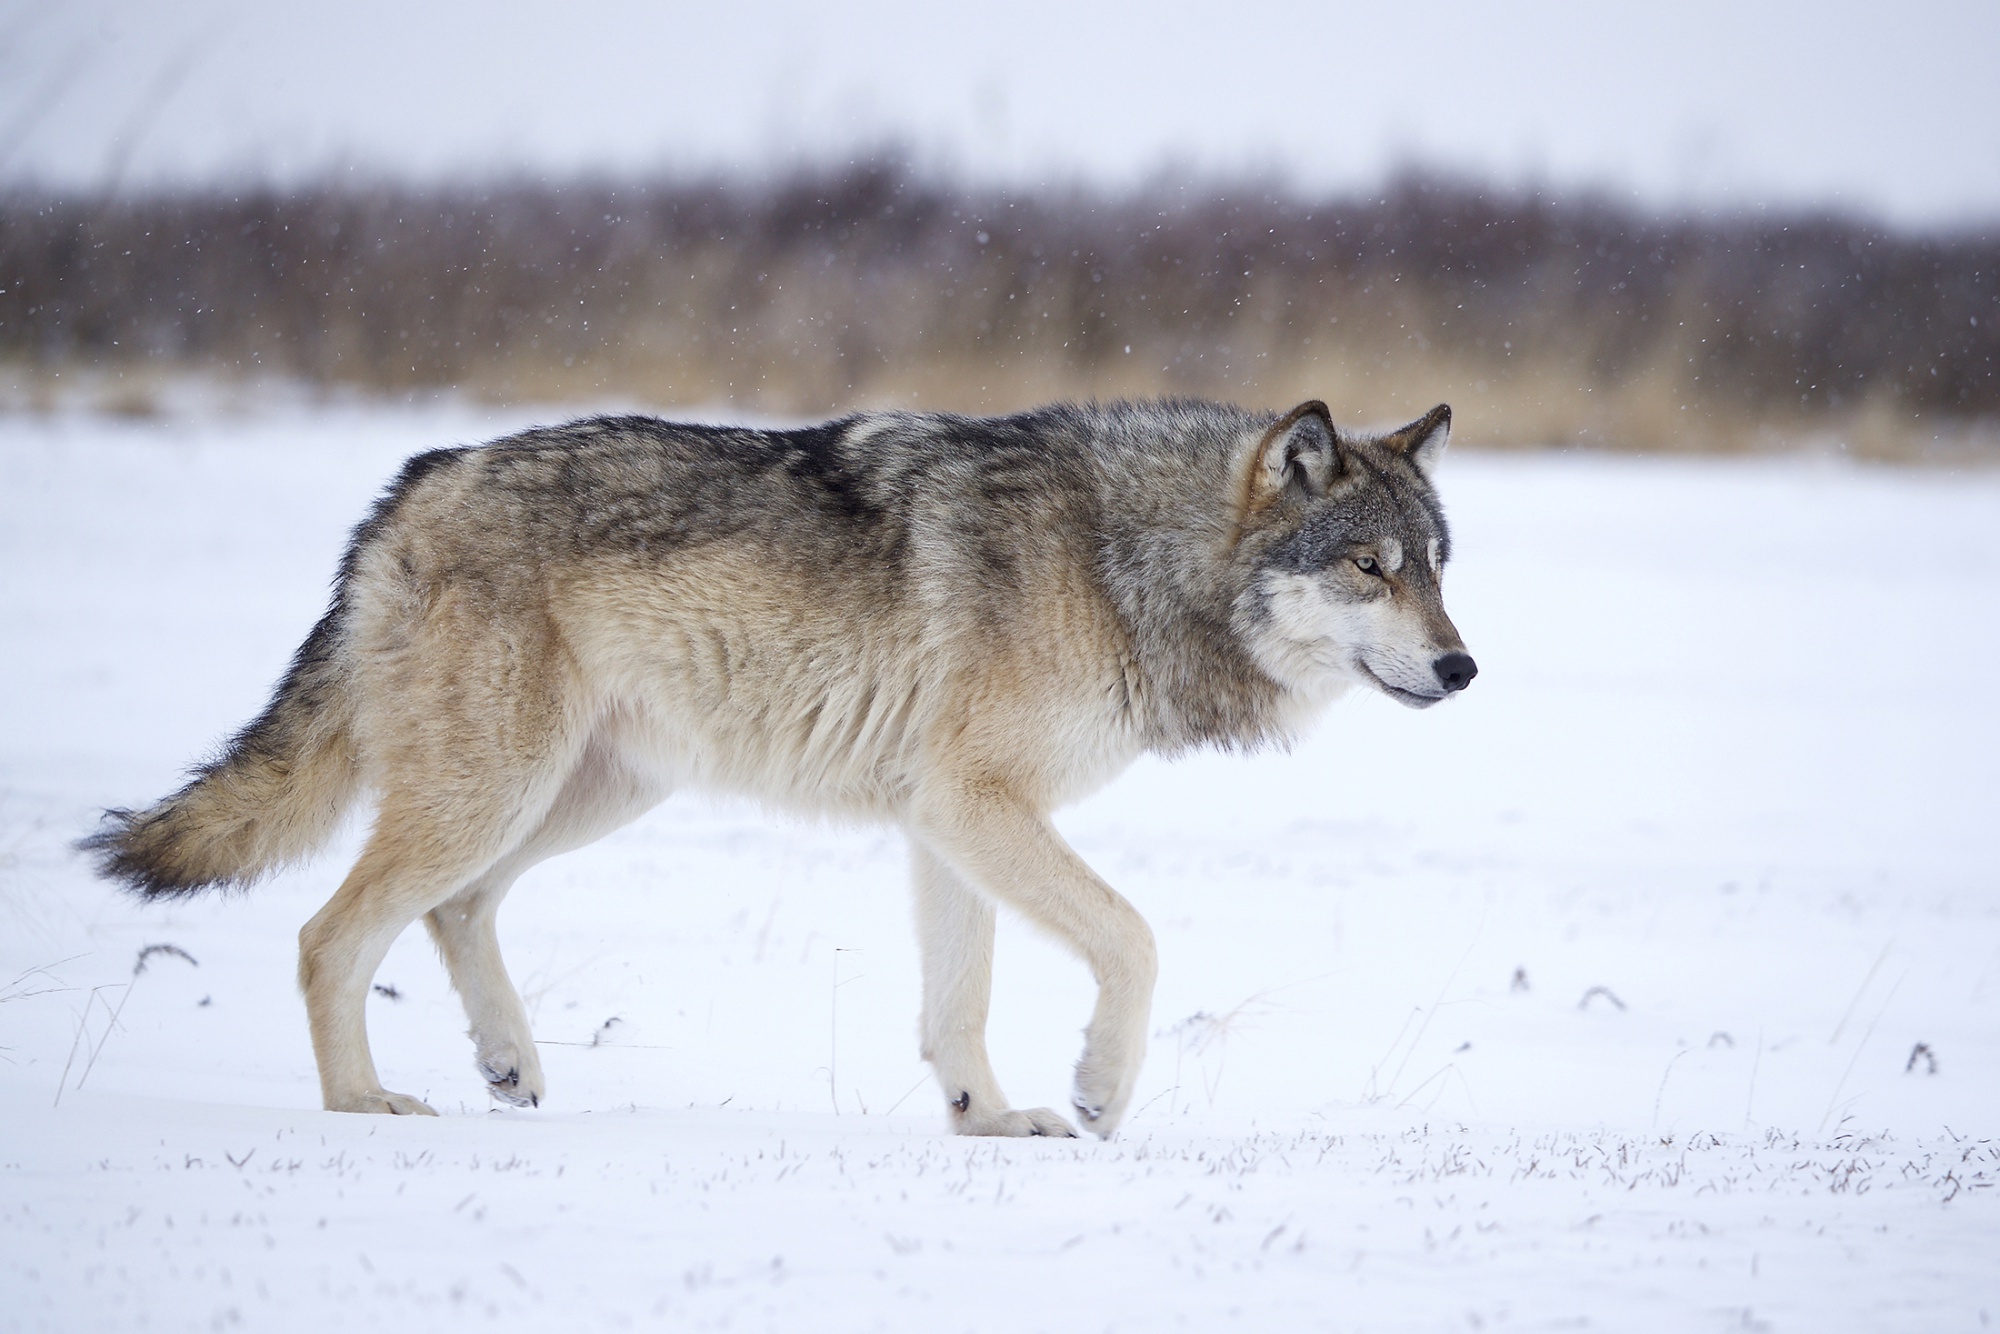 US House Passes Bill to Drop Legal Protections for Gray Wolves - Bloomberg